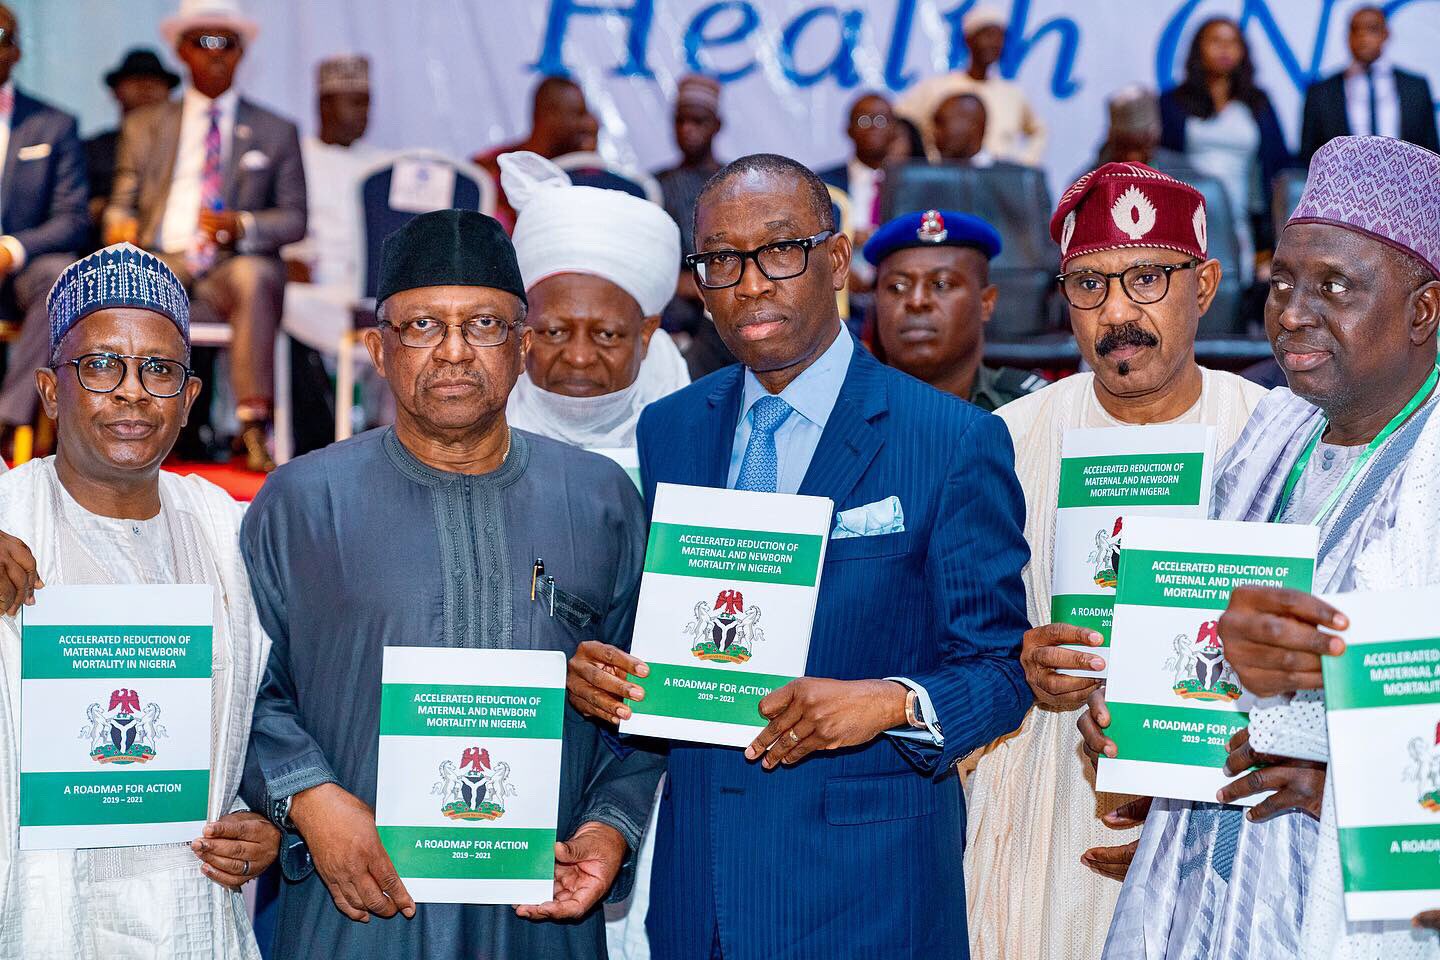 Delta State Governor, Senator Dr. Ifeanyi Okowa (center); Hon. Minister of Health Federal Republic of Nigeria, Dr. Osagie Ehanire (2nd left); Hon. Minister of State for Health, Dr. Olorunnimbe Mamora (2nd right), Others during the 62nd National Council on Health (NCH) Meeting, held at Dome Event Centre Okpanam Road, Asaba Delta State. 